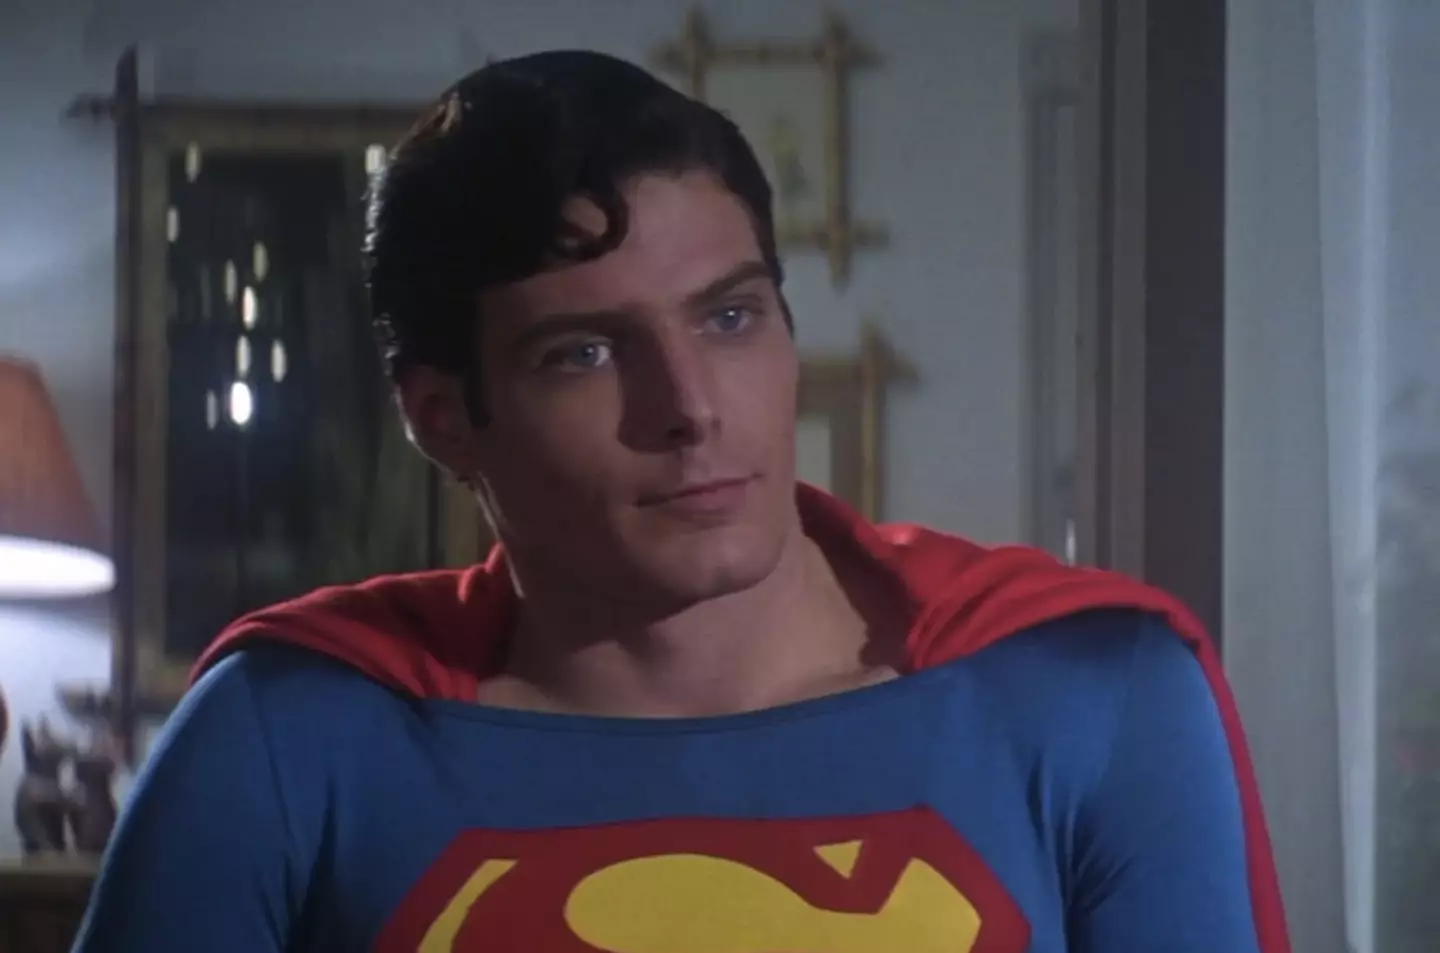 The original Superman movie was released in 1978.